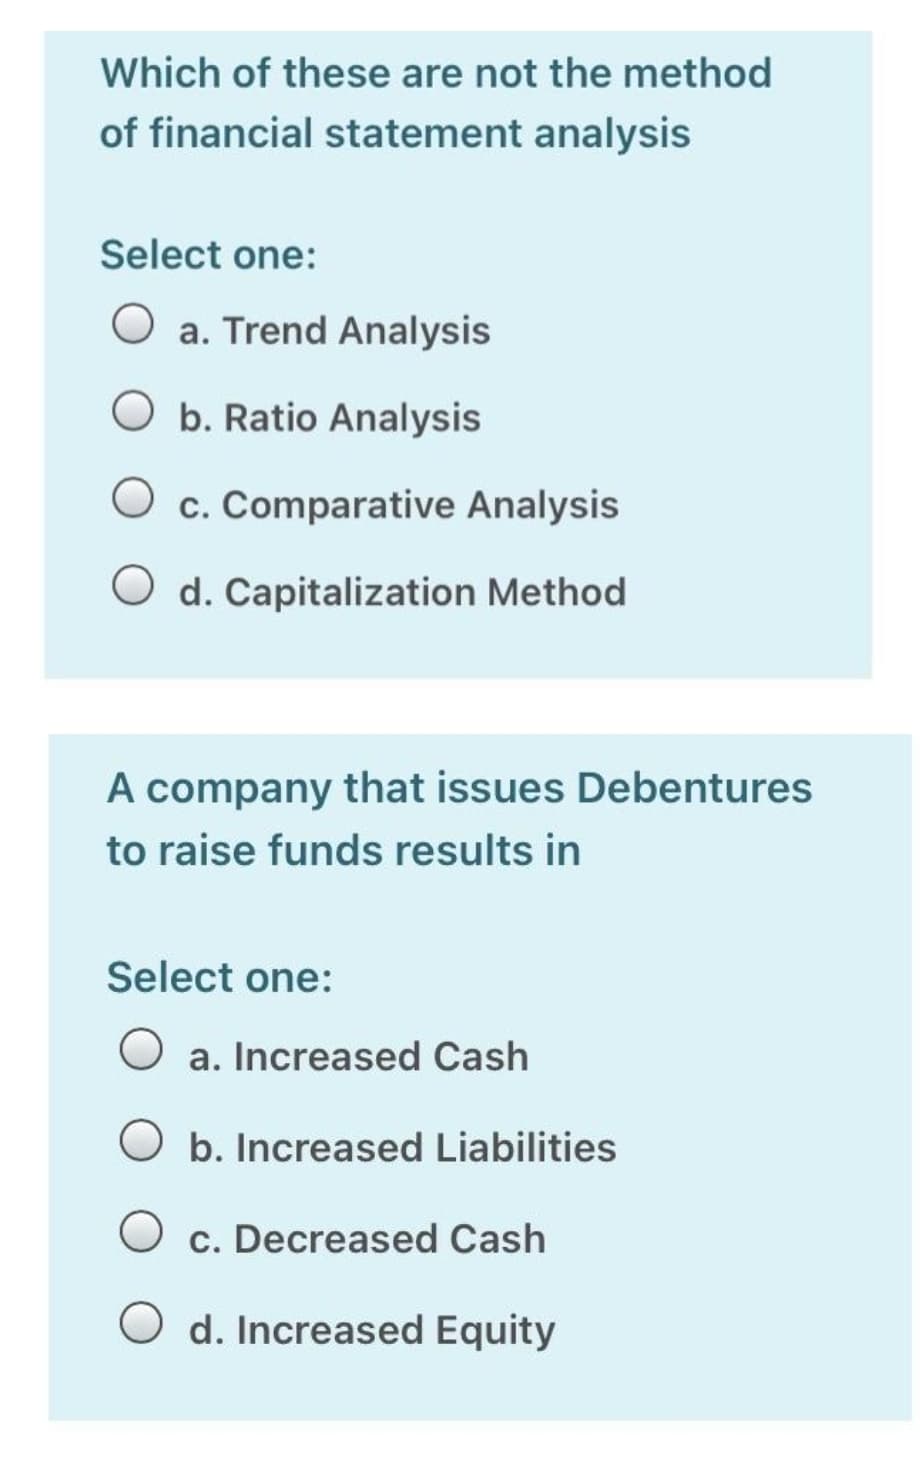 Which of these are not the method
of financial statement analysis
Select one:
O a. Trend Analysis
O b. Ratio Analysis
O c. Comparative Analysis
O d. Capitalization Method
A company that issues Debentures
to raise funds results in
Select one:
a. Increased Cash
O b. Increased Liabilities
O c. Decreased Cash
d. Increased Equity
